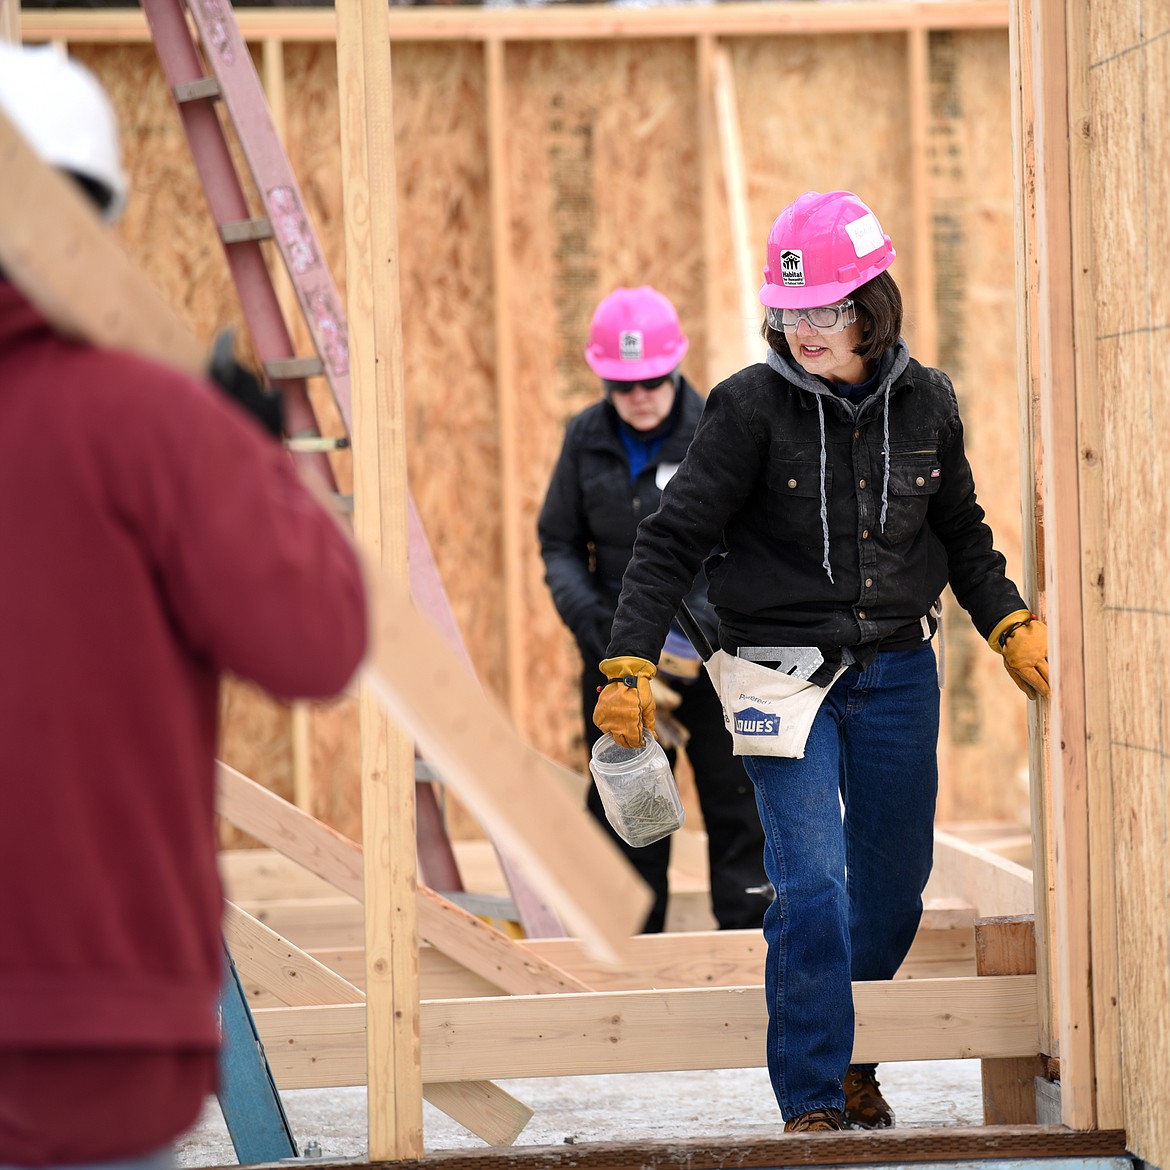 Robin Paone picks her way through the Habitat for Humanity construction site on Sixth Avenue West in Kalispell. Paone typically volunteers once a month with her husband, but she came out a day earlier this week because Friday was slated as the Women Build.